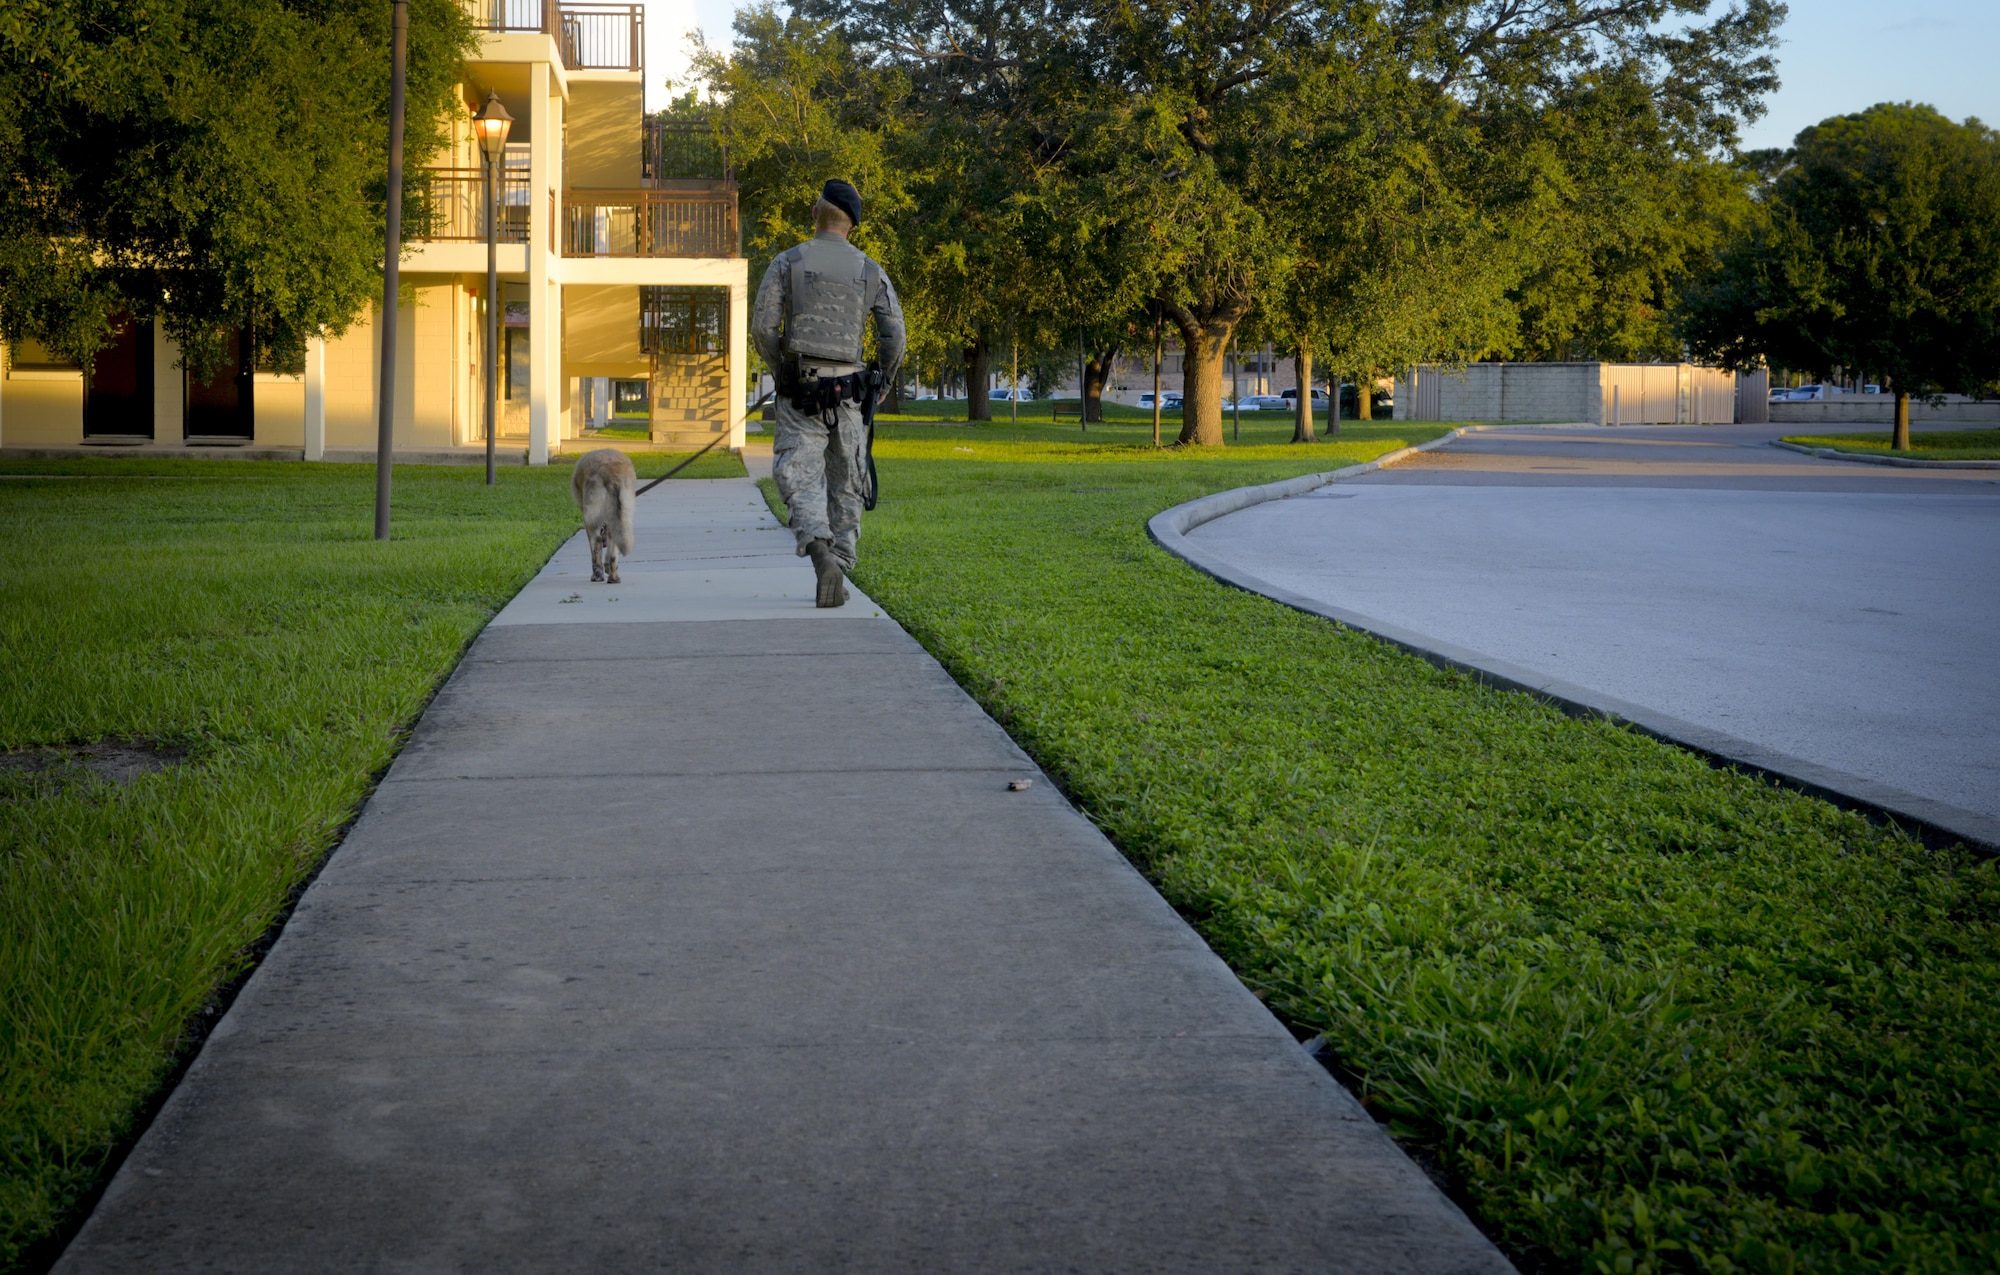 U.S. Air Force Senior Airman Brian Loughmiller, a military working dog handler assigned to the 6th Security Forces Squadron, patrols the base with Jecky, a military working dog, at MacDill Air Force Base, Fla., Aug. 15, 2017. Military working dogs and their handlers frequently patrol the base to ensure it is safe. (U.S. Air Force photo by Senior Airman Mariette Adams)